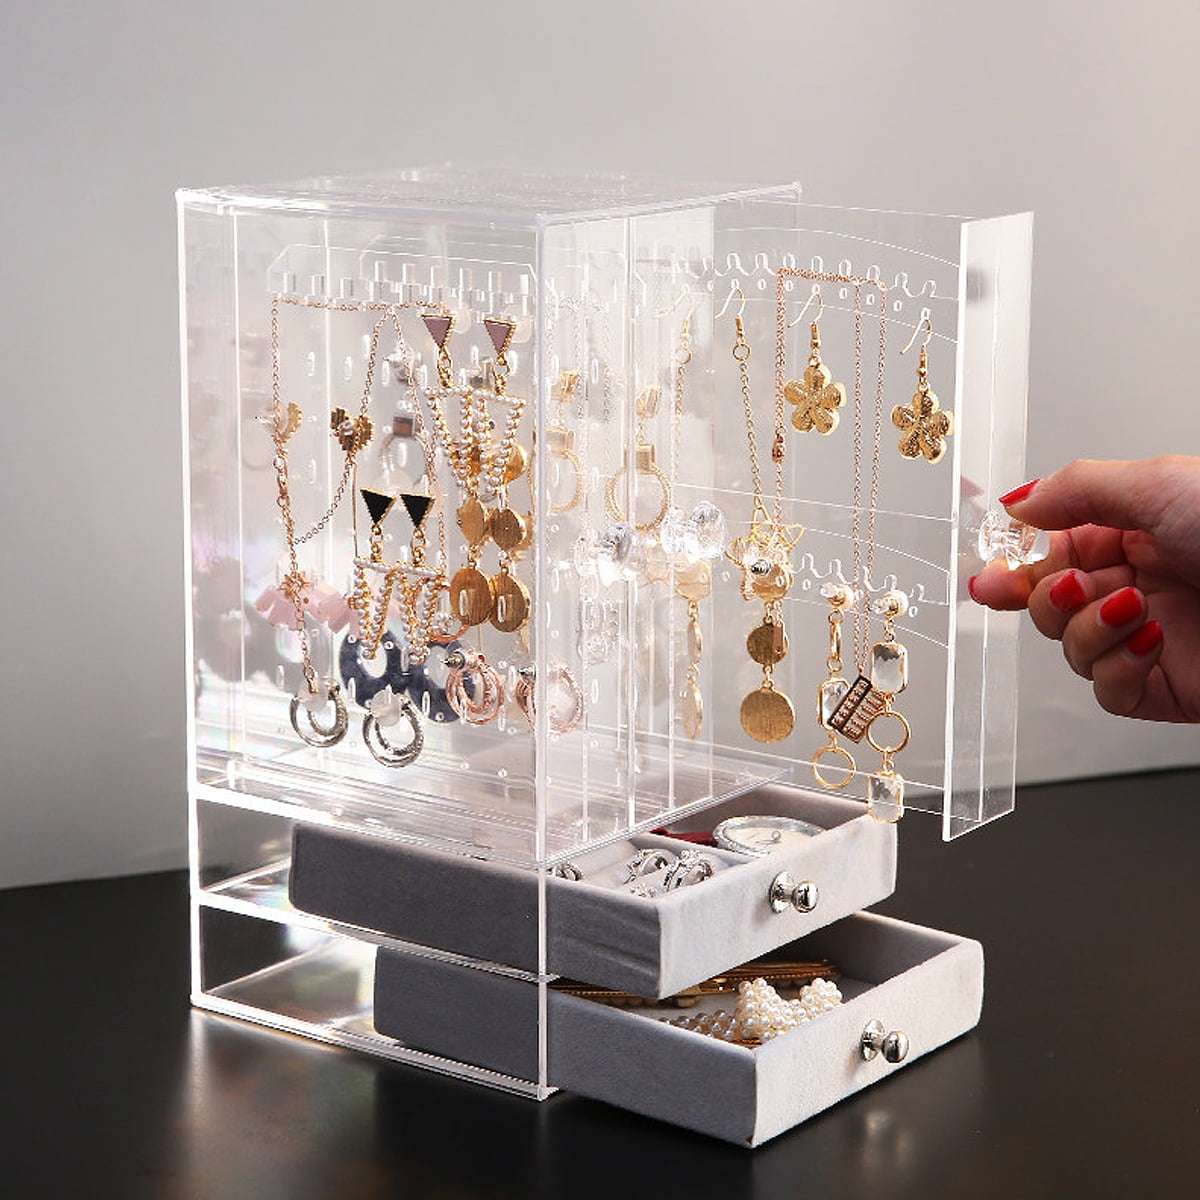 100 Pieces Earring Necklace Display Card Holder Set with 100 Pieces Self-Seal Bags for Packing Handmade Ear Studs Earring and Jewelry Display Supplies 